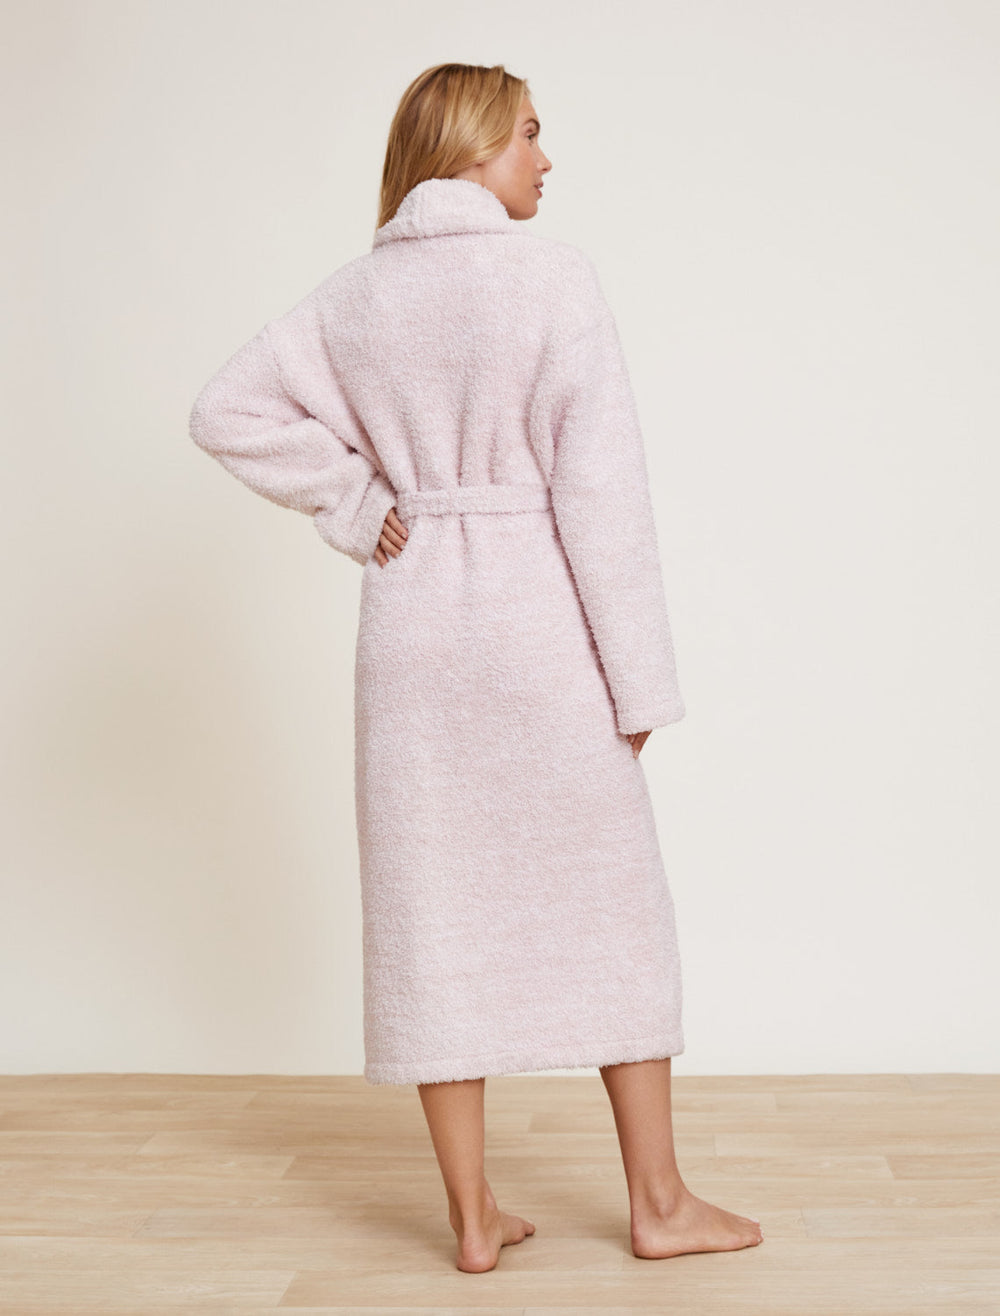 COZYCHIC HEATHERED ADULT ROBE-DUSTY ROSE/WHITE - Kingfisher Road - Online Boutique